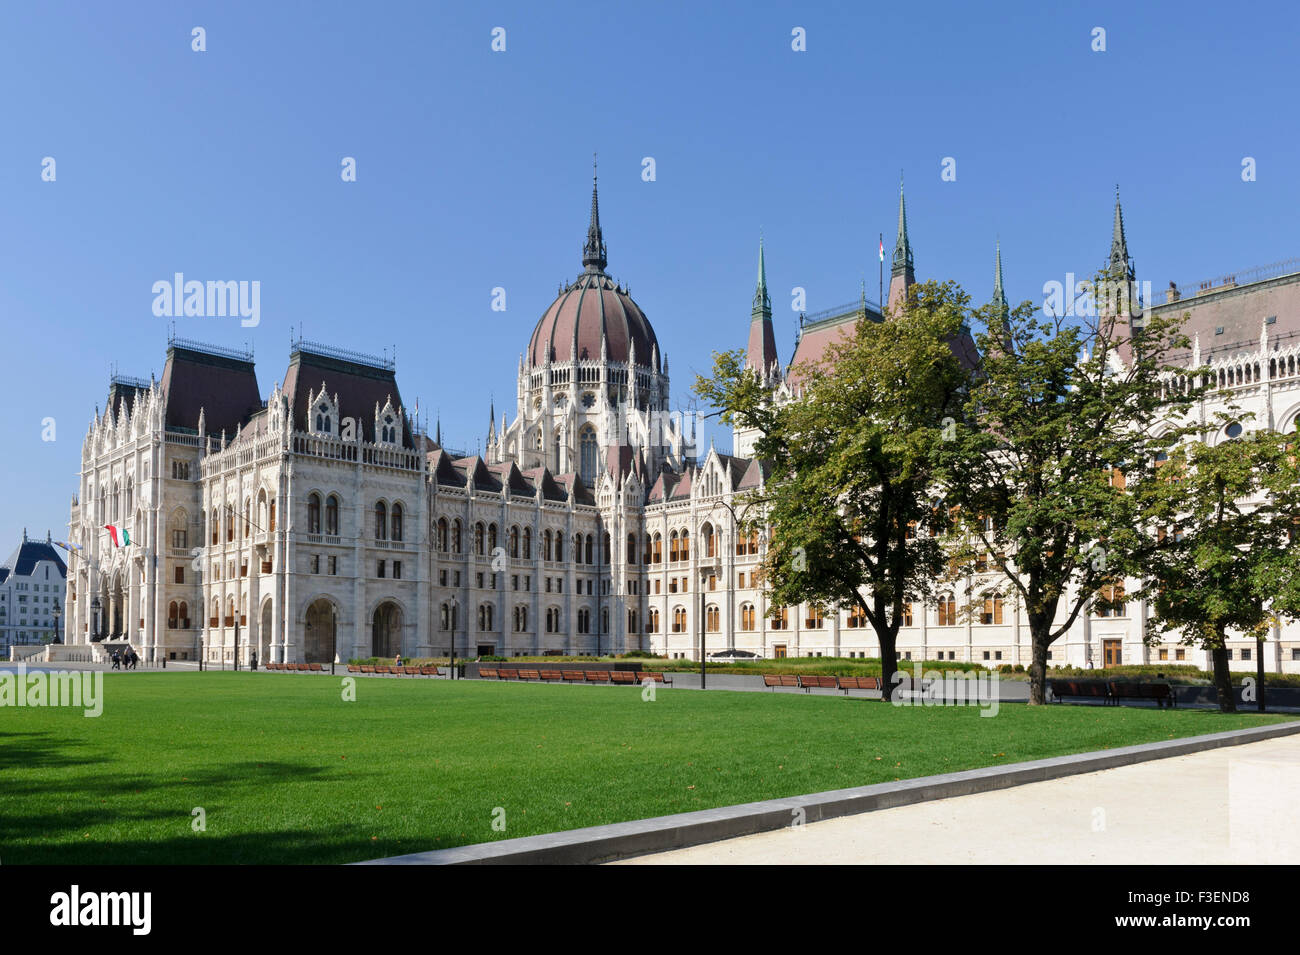 The Hungarian Parliament building in Budapest, Hungary. Stock Photo